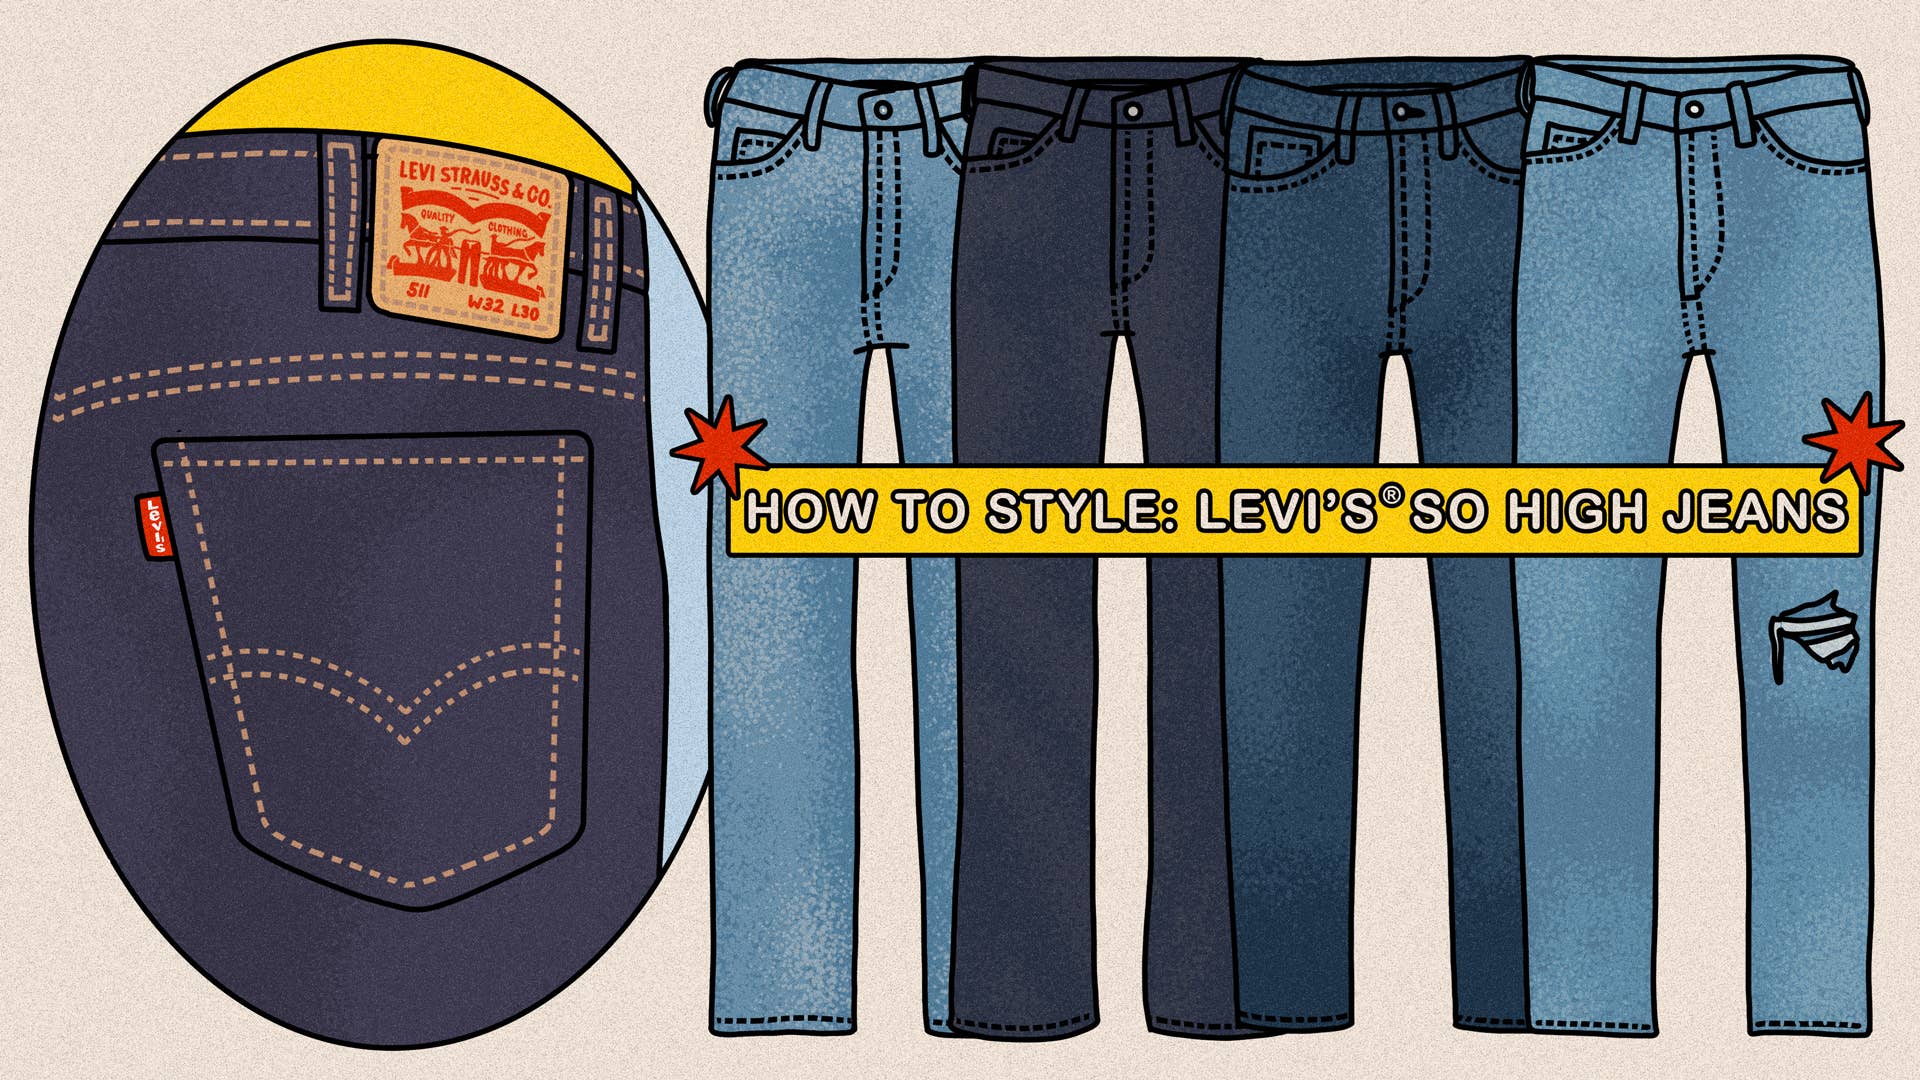 How to Style Levi's® So High Jeans